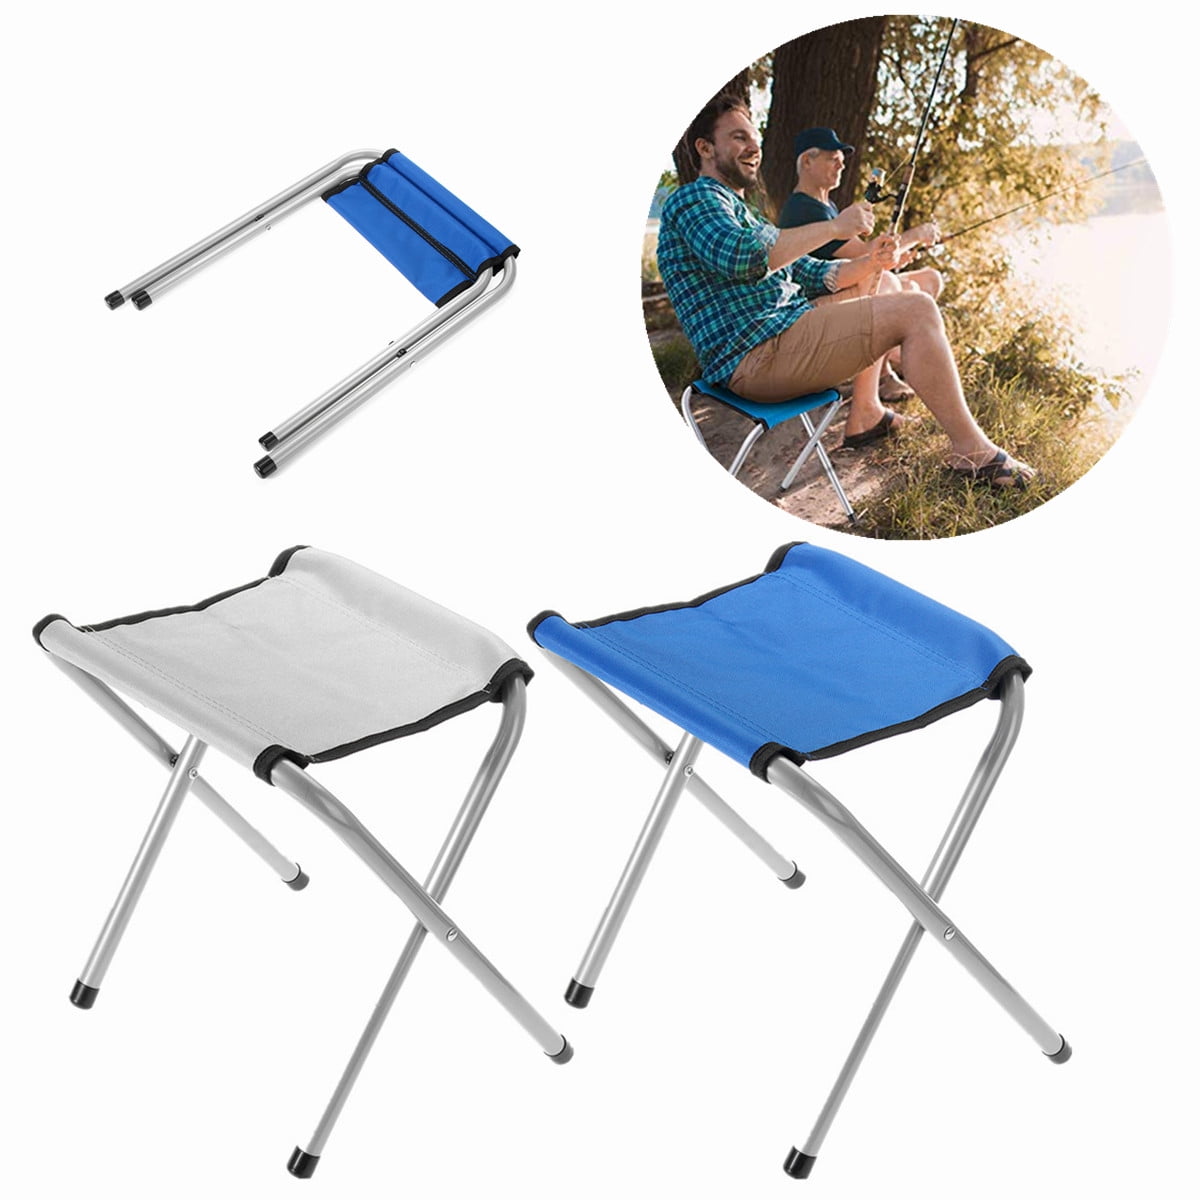 Folding Chairs Outdoor Mini Portable Camping Fishing Picnic Small Stool Seat US